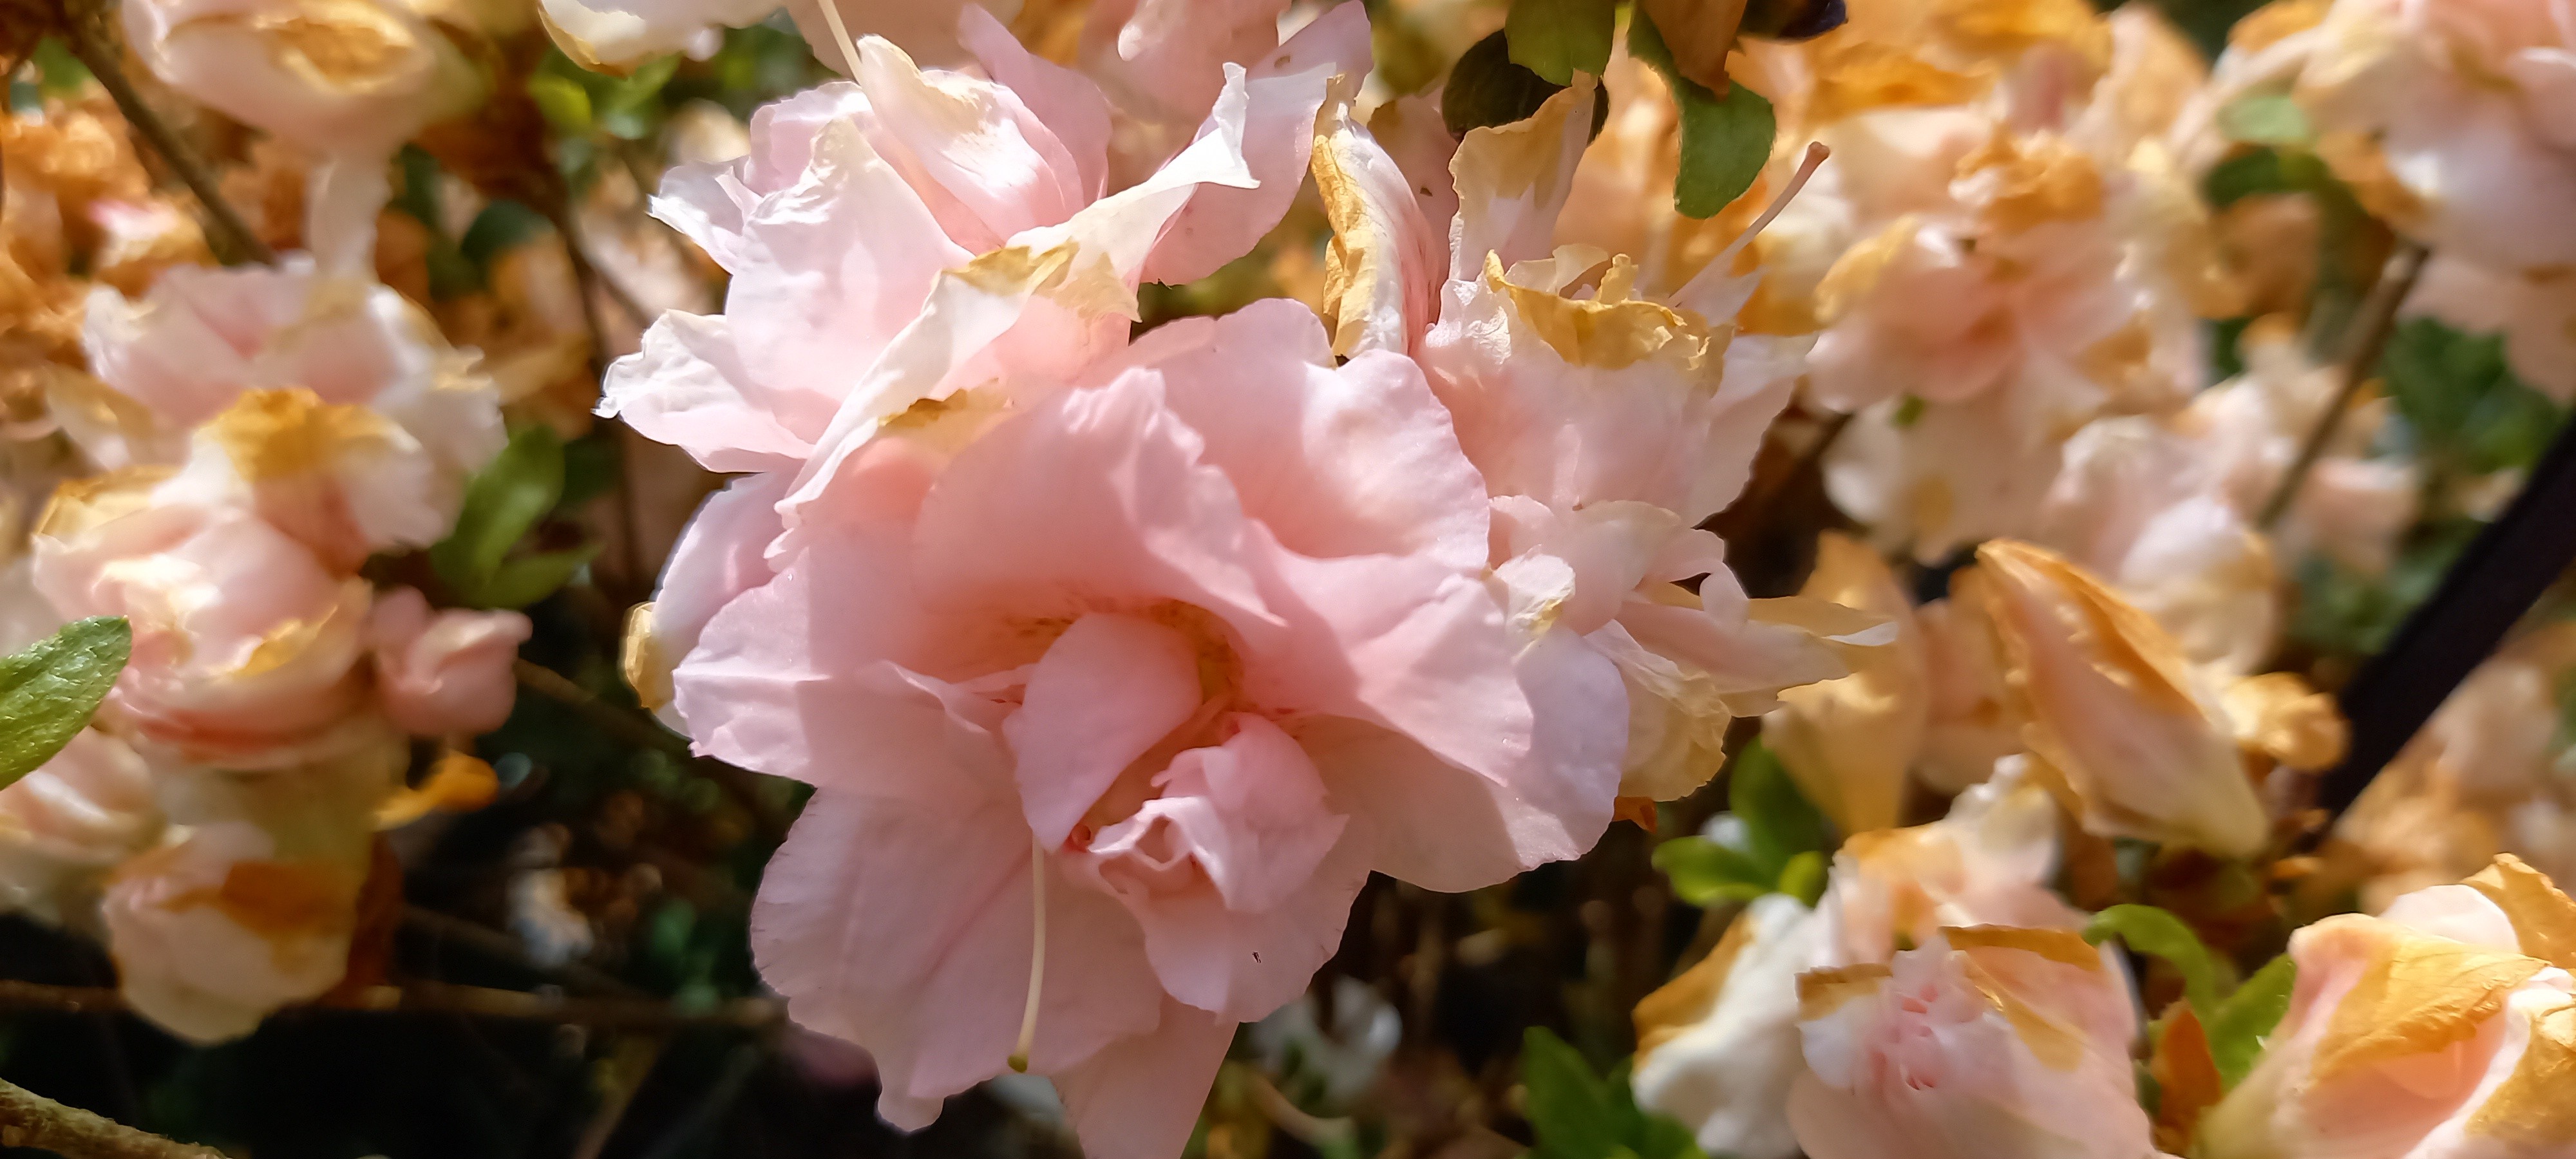 Rhododendron japonica 'Lady Louise' 